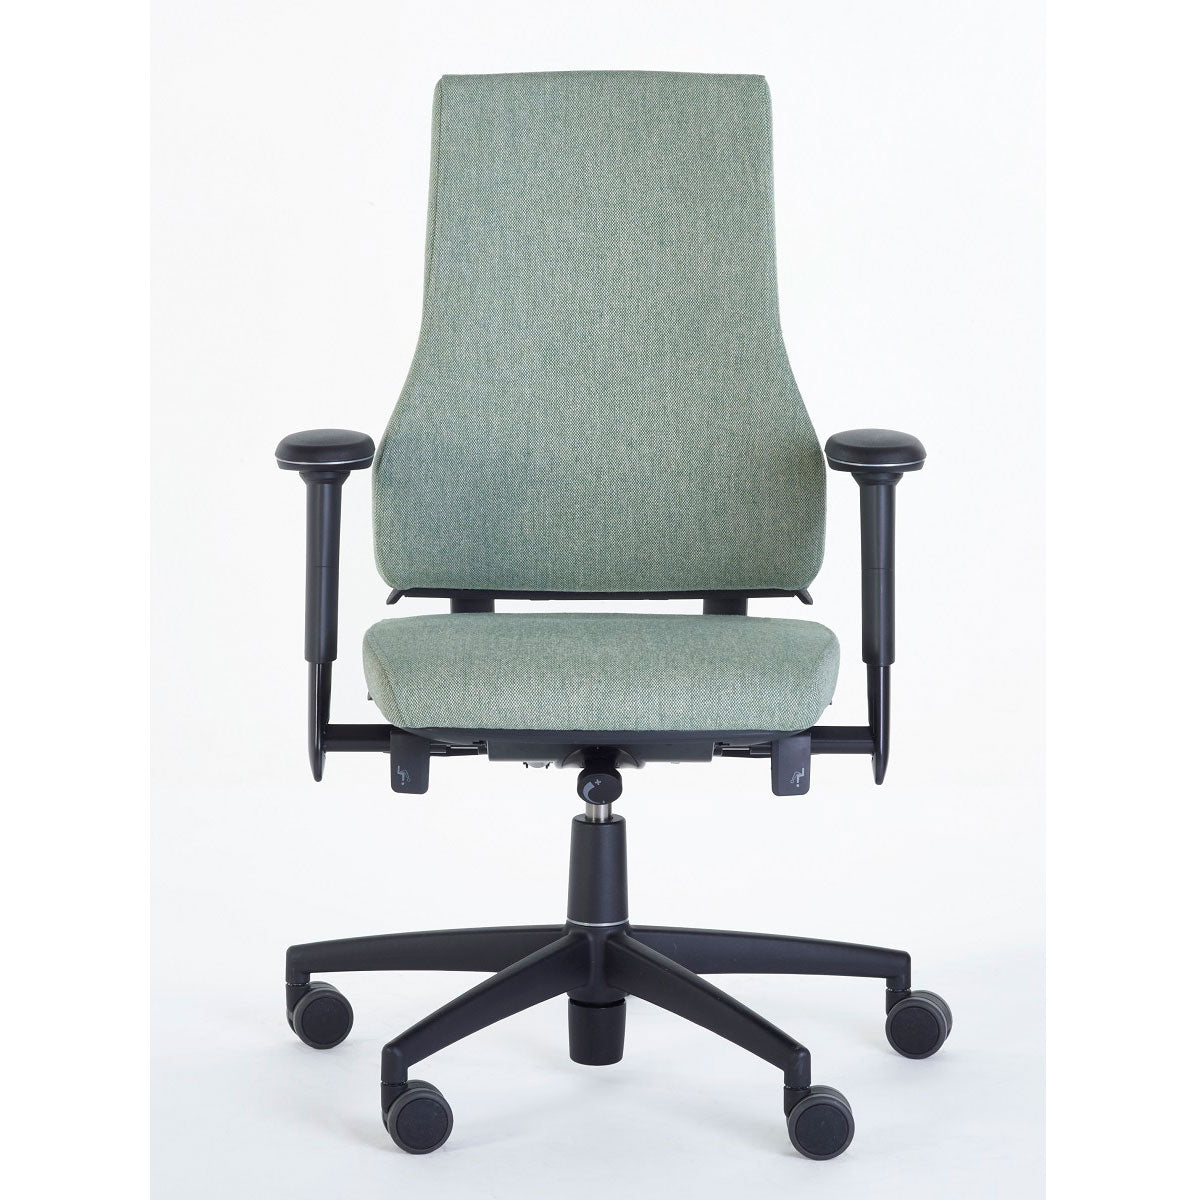 Axia 3124 Office Extra High Back Chair